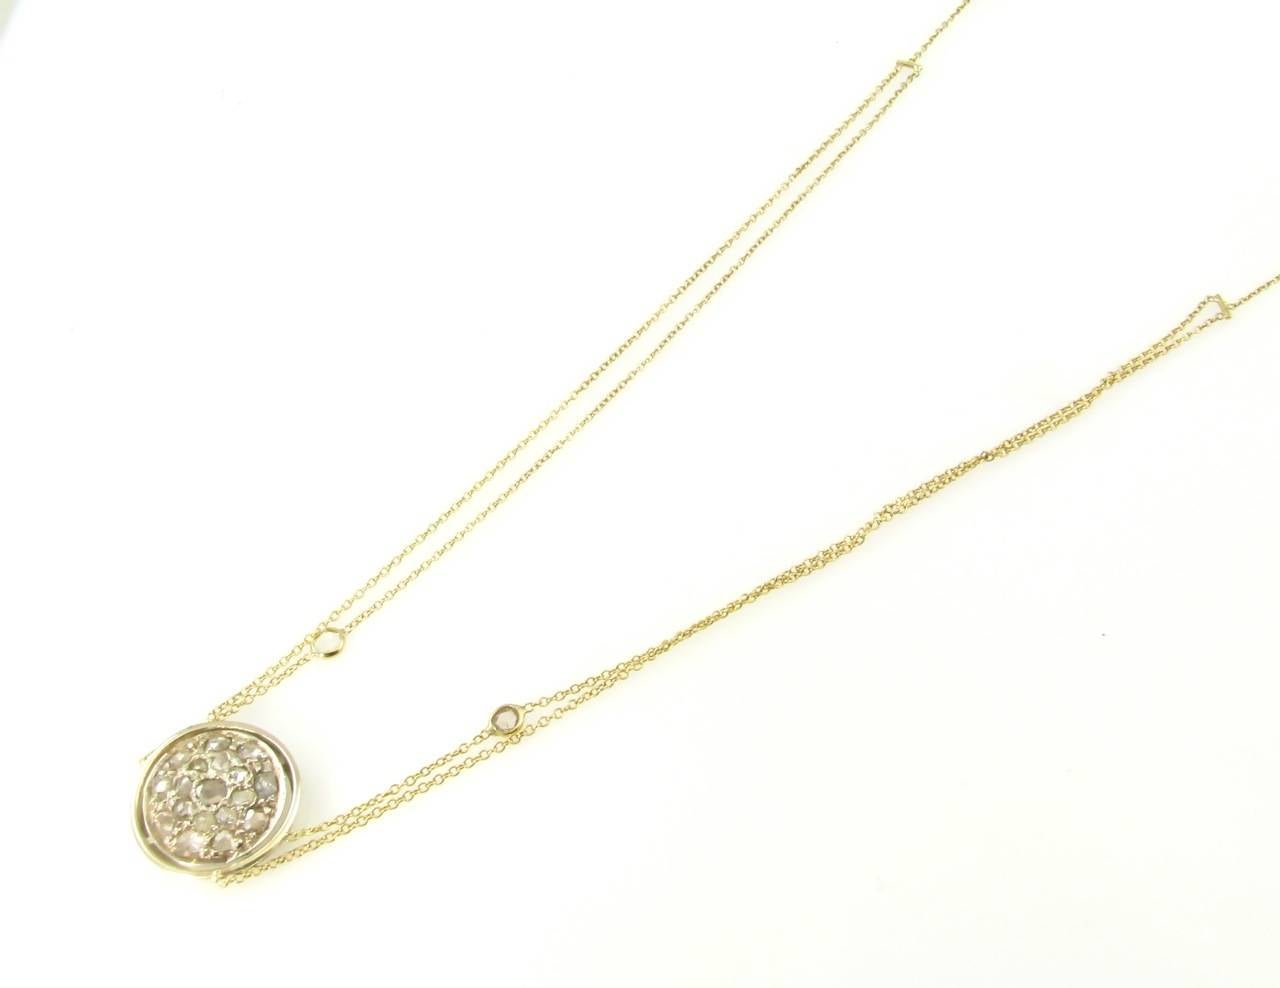 An 18 karat yellow gold and rose cut diamond pendant necklace, Signed Renee Lewis 18KT.  The center disc form pendant is pave set with 18 rose cut diamonds, and 2 collet set diamonds are set in the double chain necklace with toggle closure.  The 20